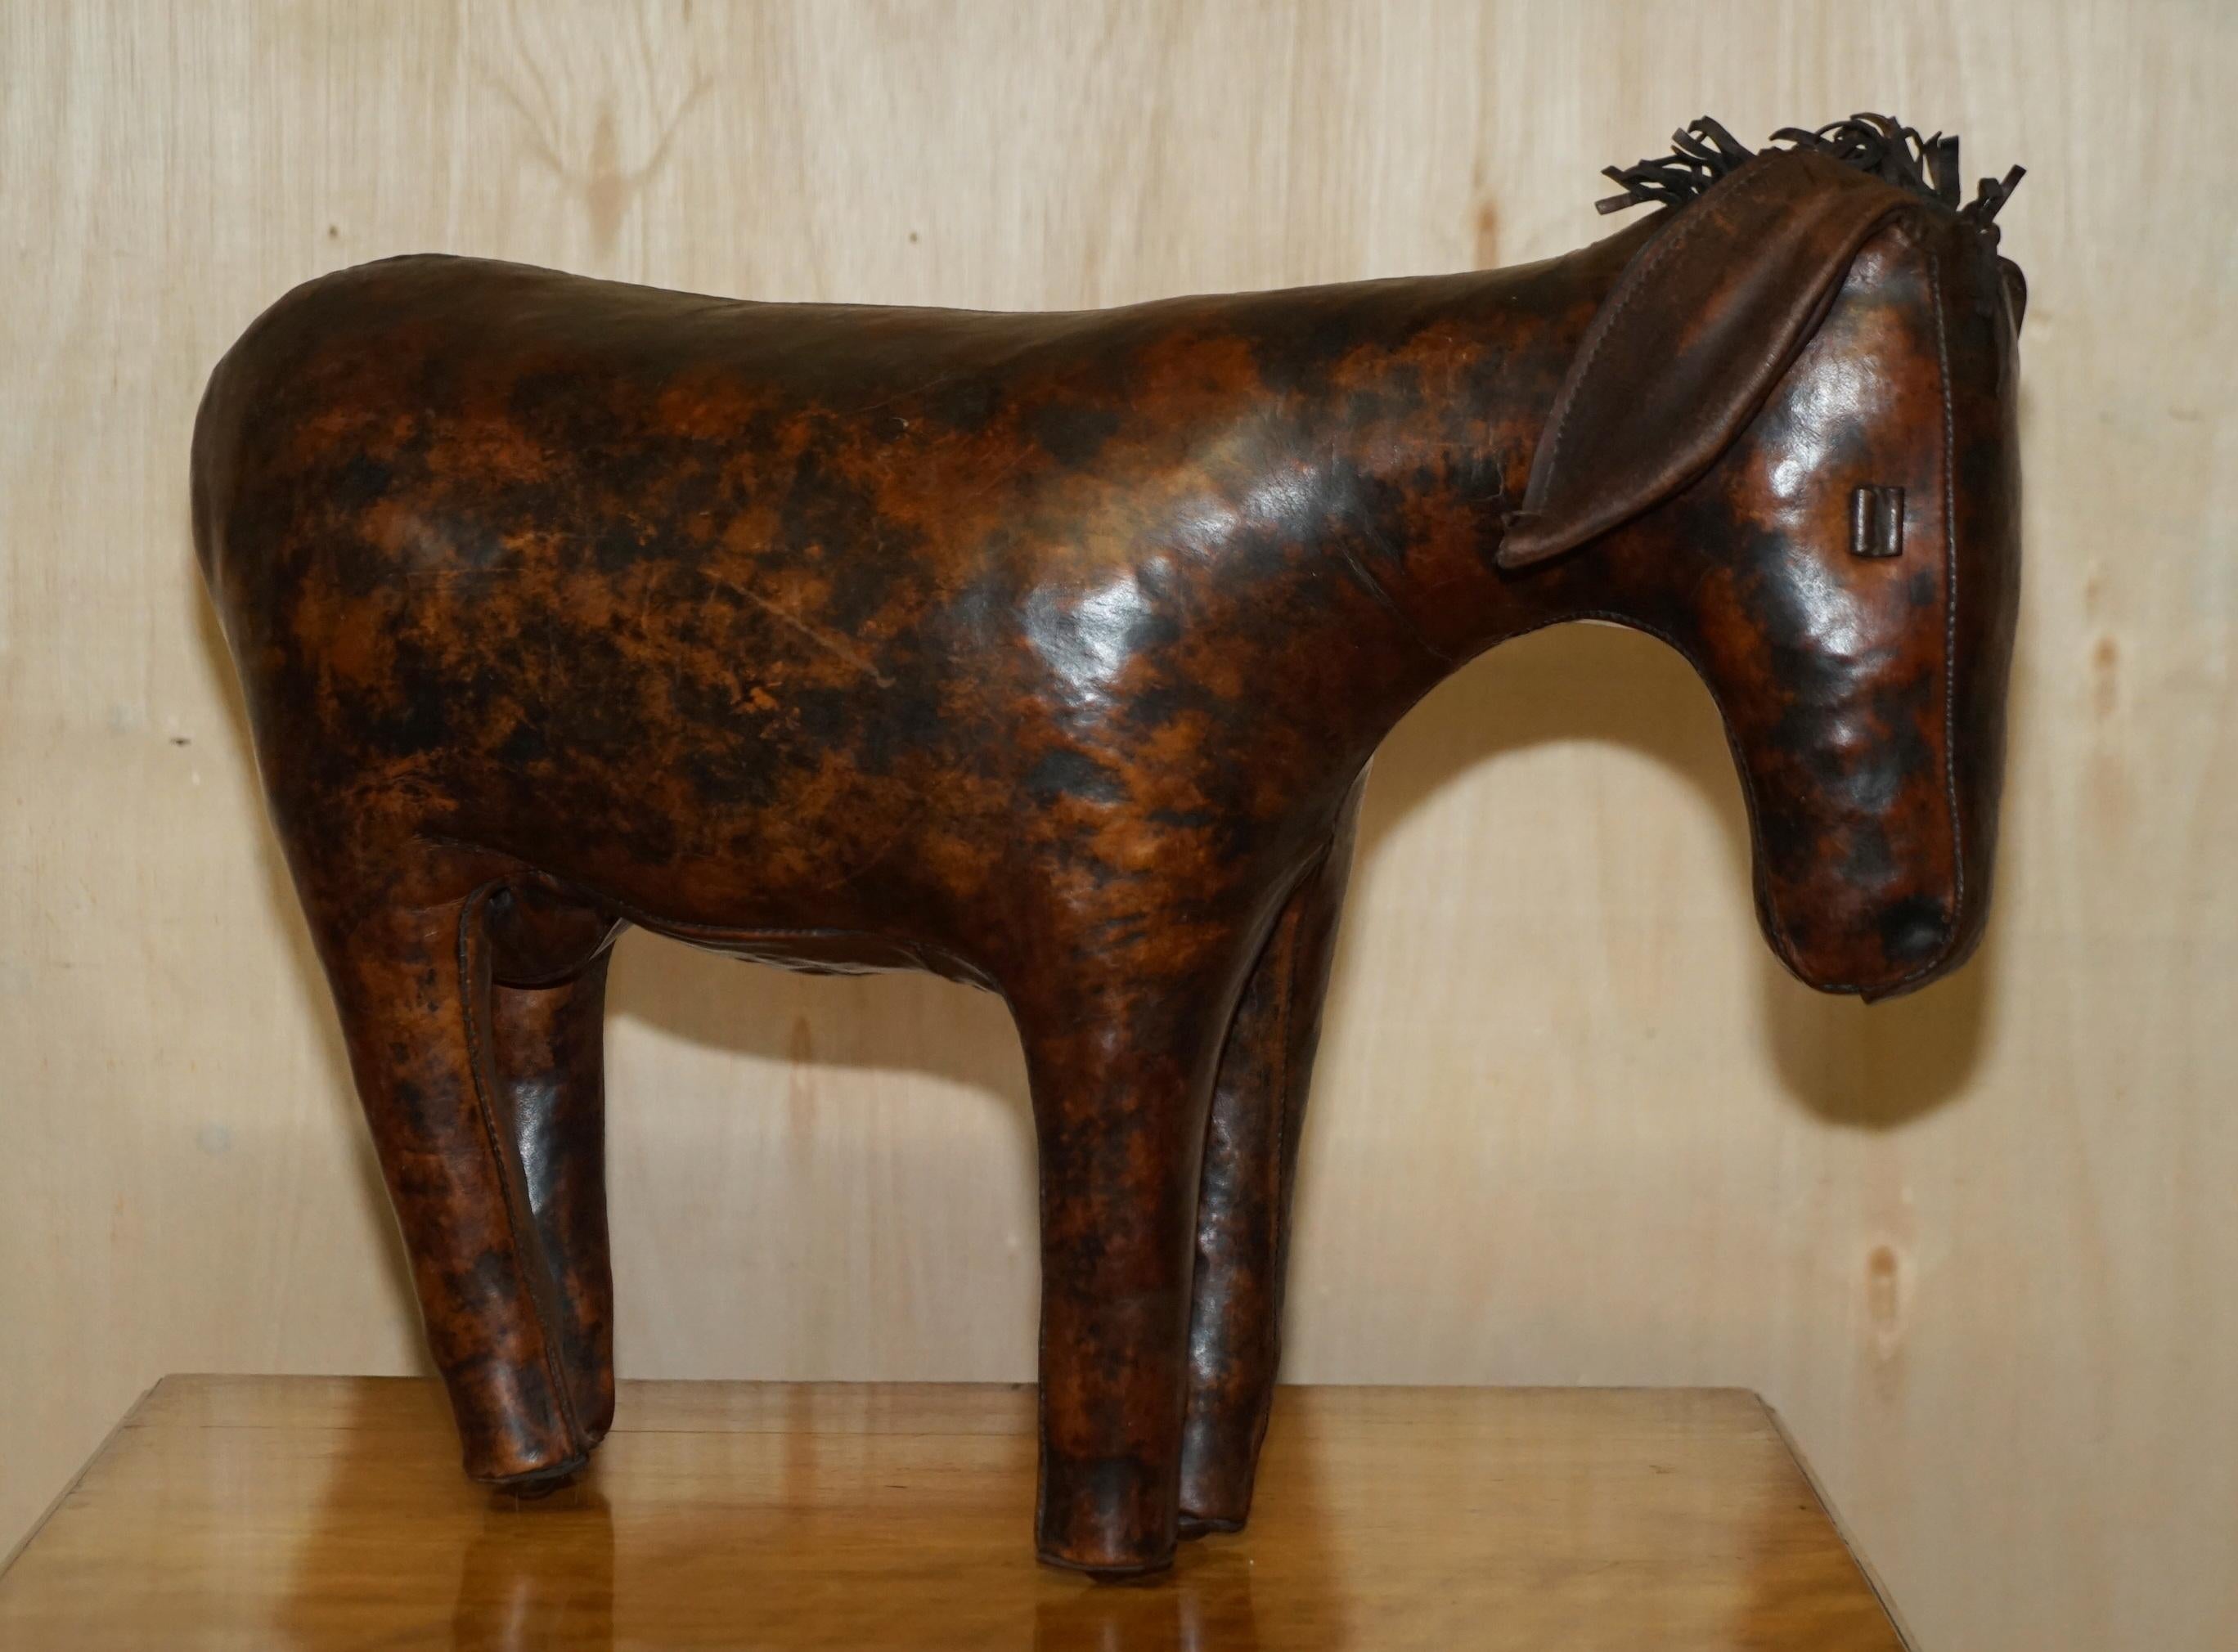 We are delighted to offer for sale this absolutely sublime circa 1940's Abercrombie & Fitch Omersa brown leather hand dyed Donkey or Pony footstool.

These come in varying sizes there is a medium size which is perfect for one person to use as a